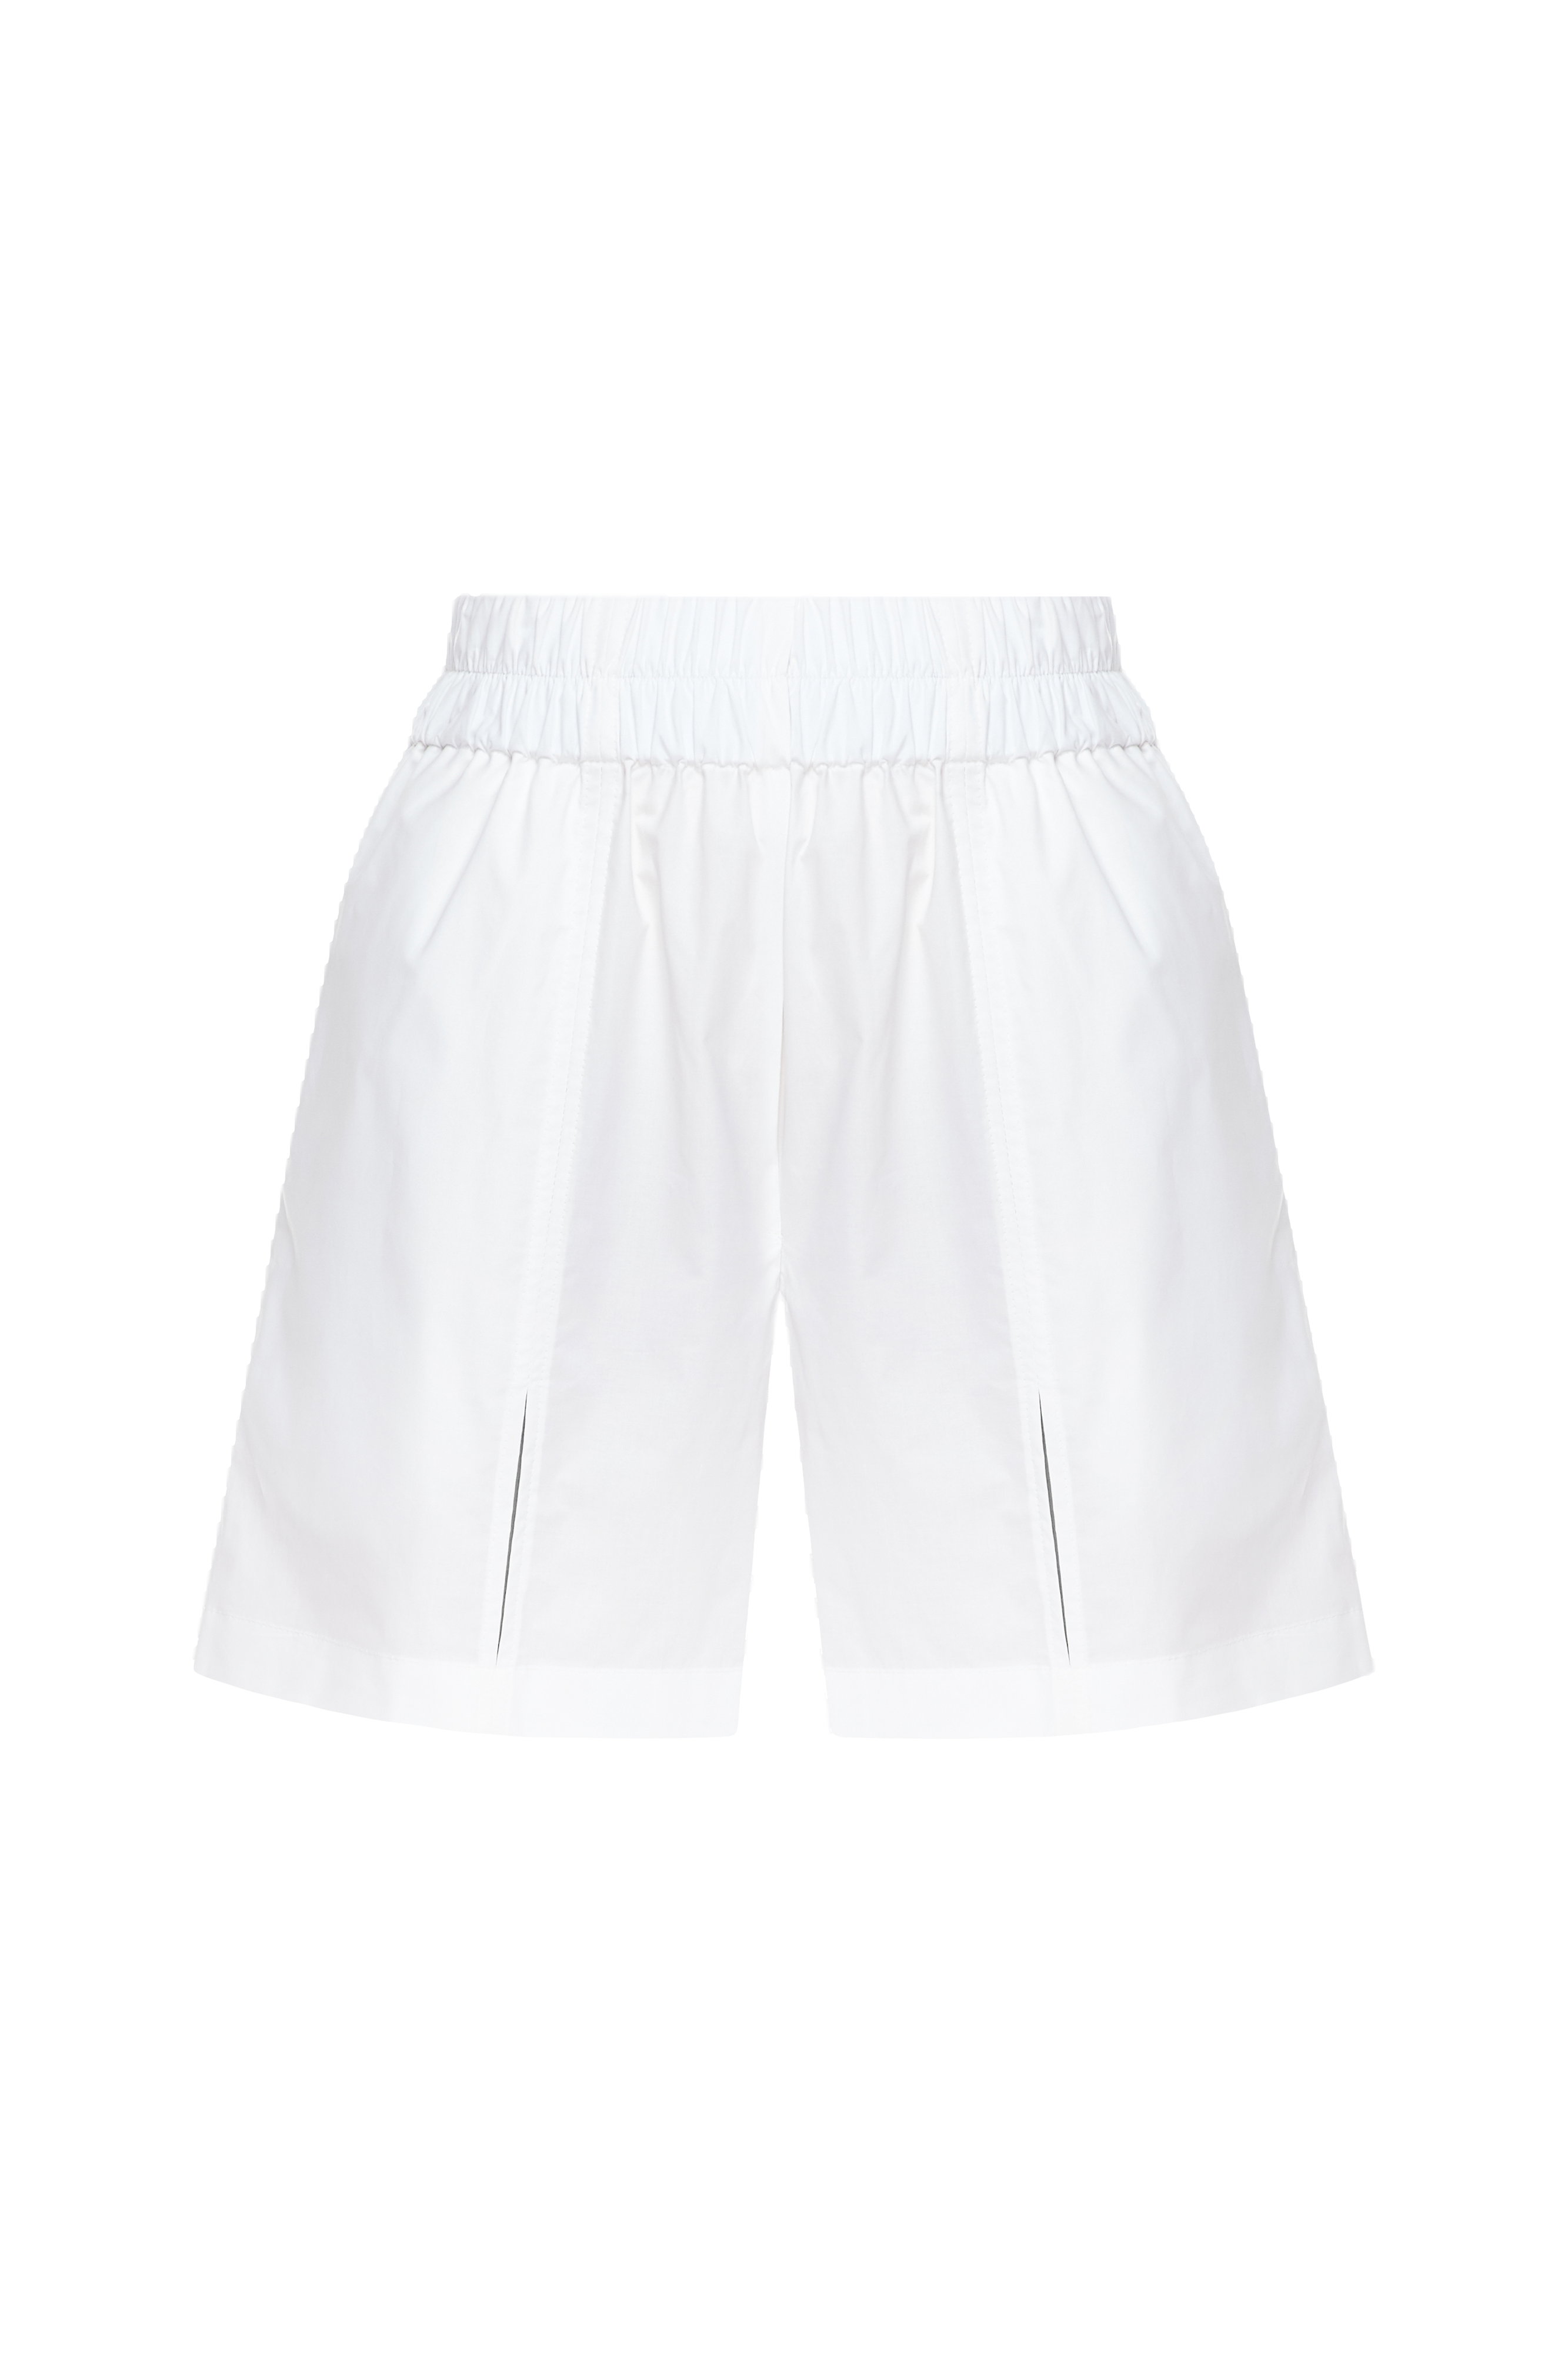 Malva Florea Bermuda Shorts With An Elastic Band With Slits At The Seams In White